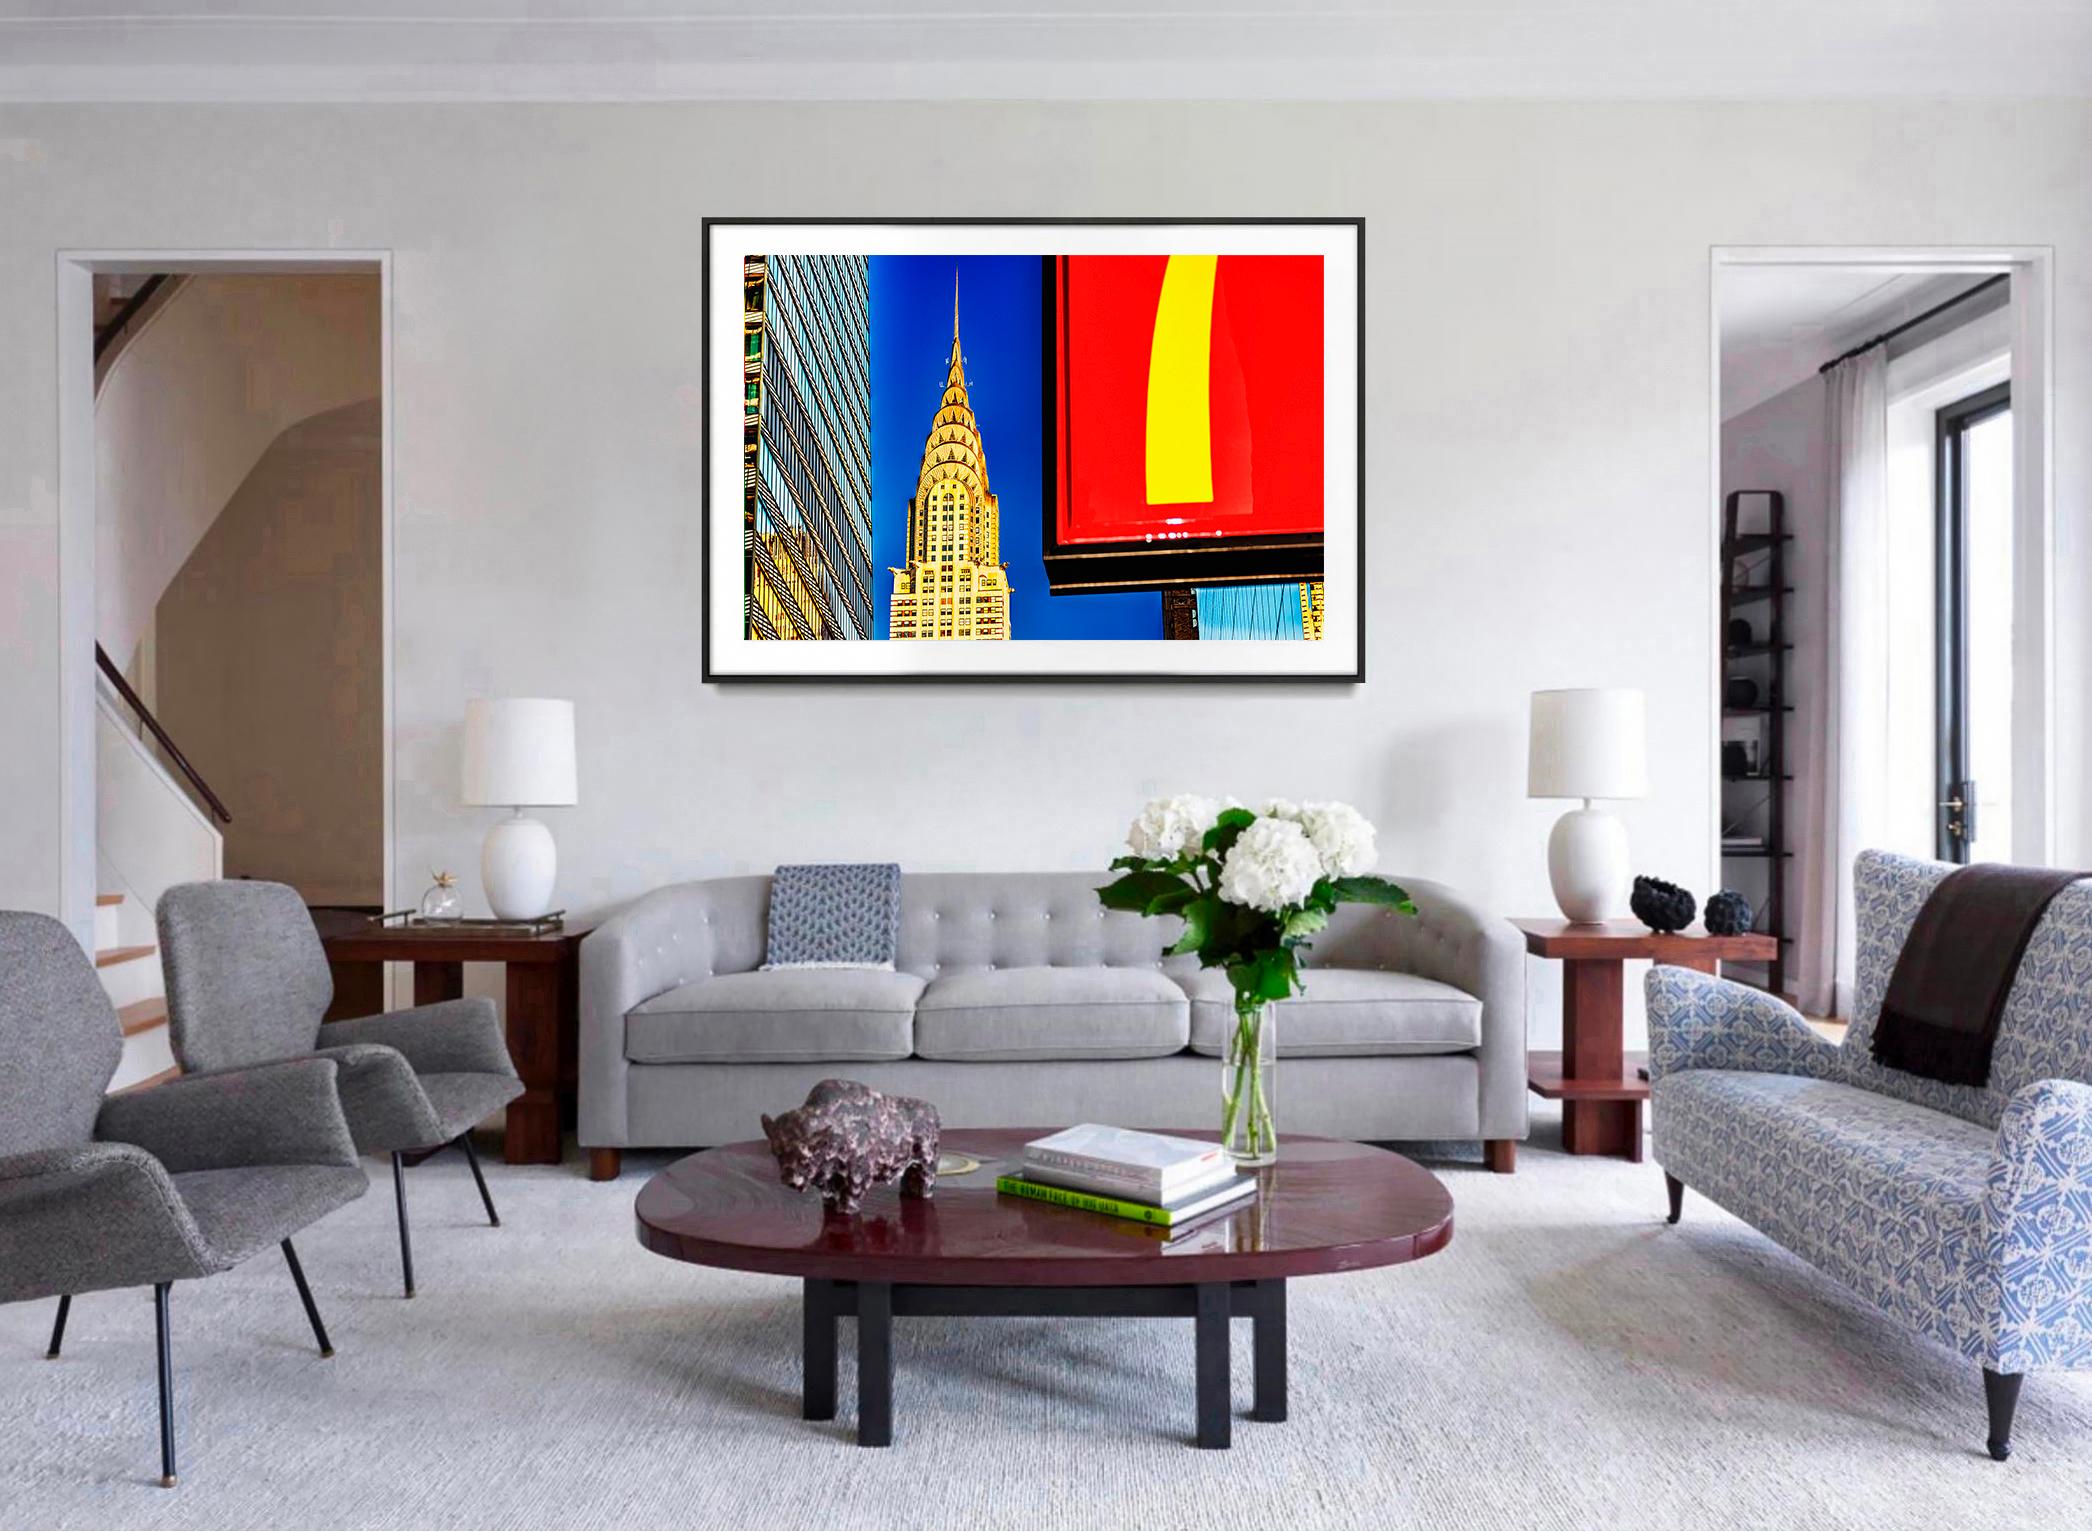 For 53 years, Mithcell Funk has been photographing the art deco beauty of the Chrysler Building. In this work, Funk frames the iconic spire between two other rectilinear shapes. On the left, there is a typical monochromatic glass skyscraper. On the